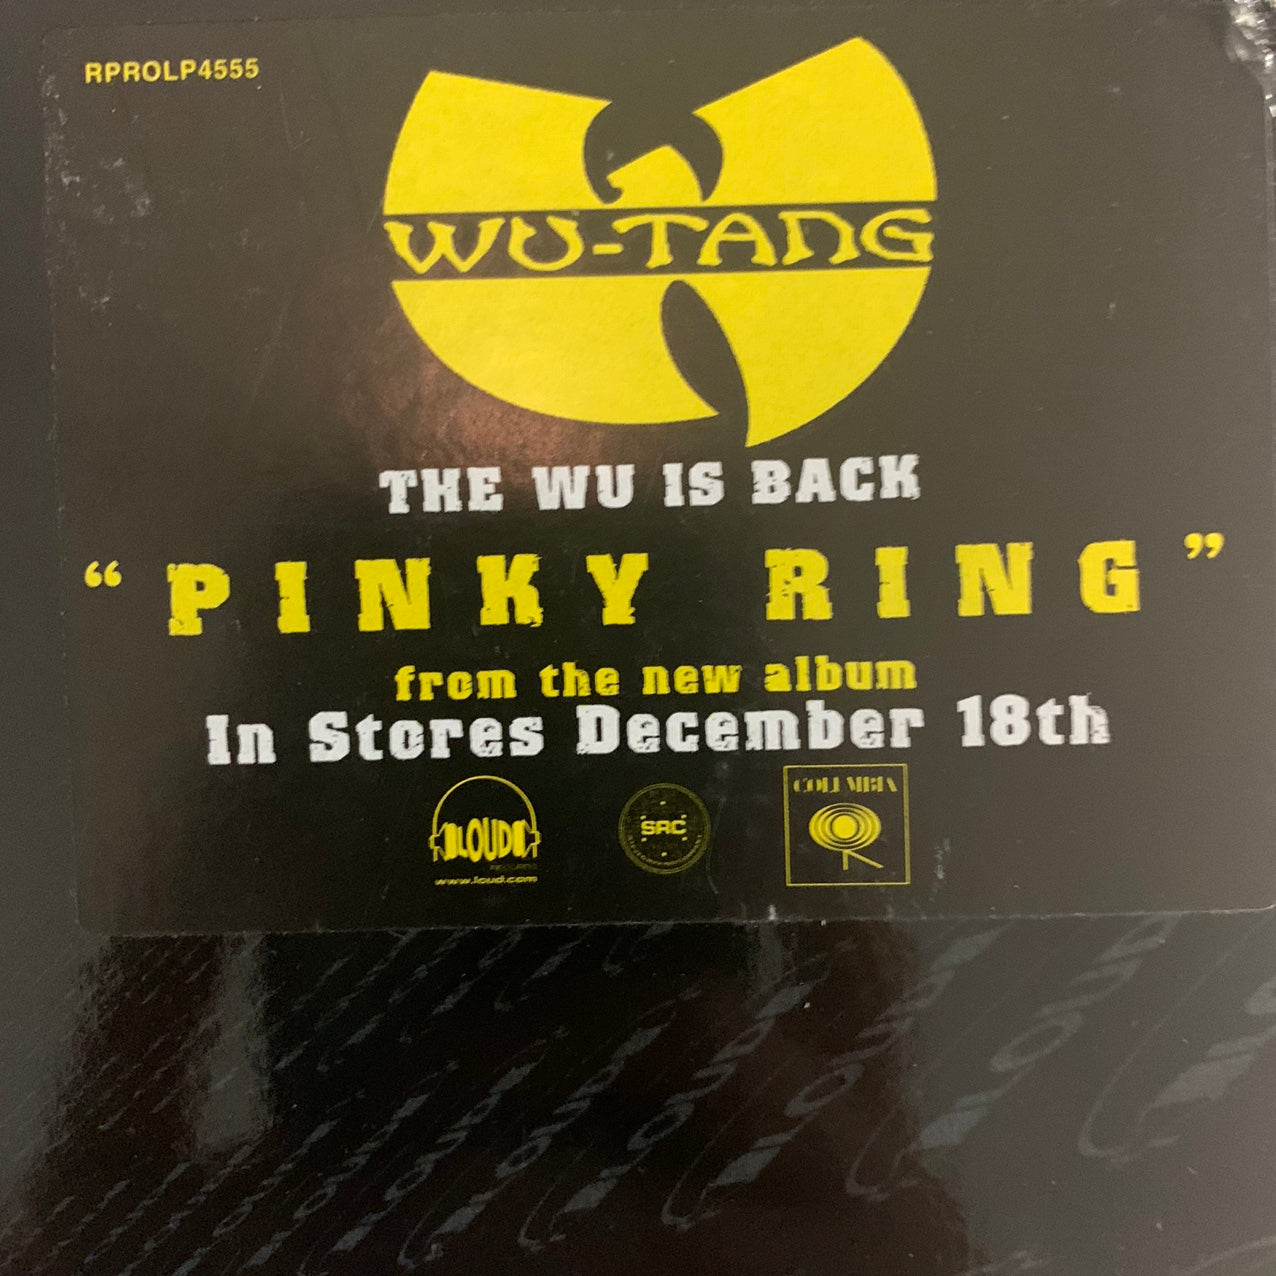 Wu-Tang Clan “Back In The Game” feat Ron Isley – Classic wax records